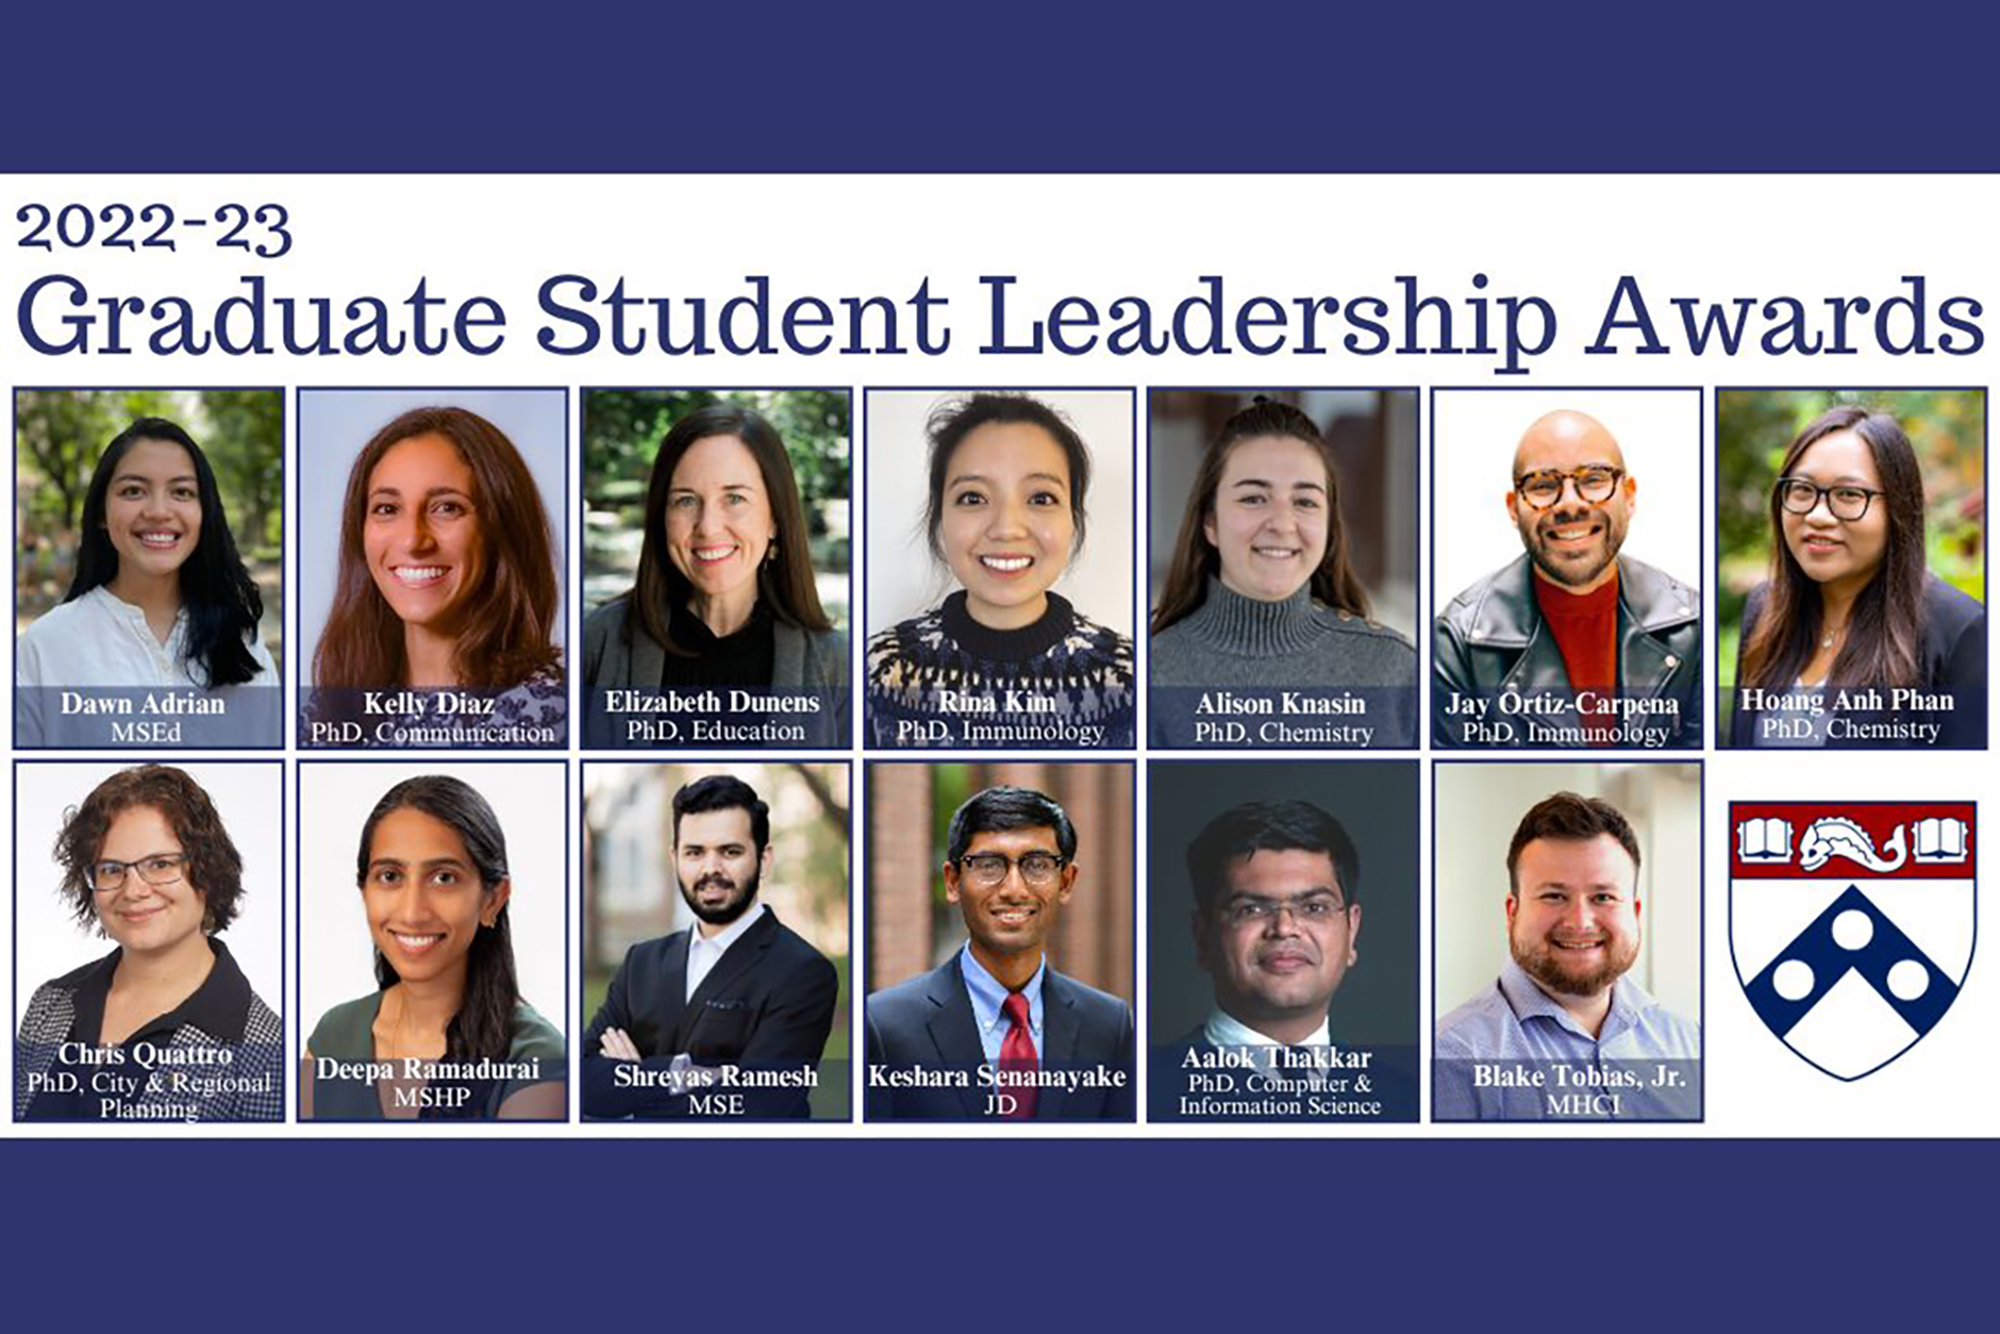 Headshots of the 13 recipients of the 2022-23 Graduate Student Leadership Awards.